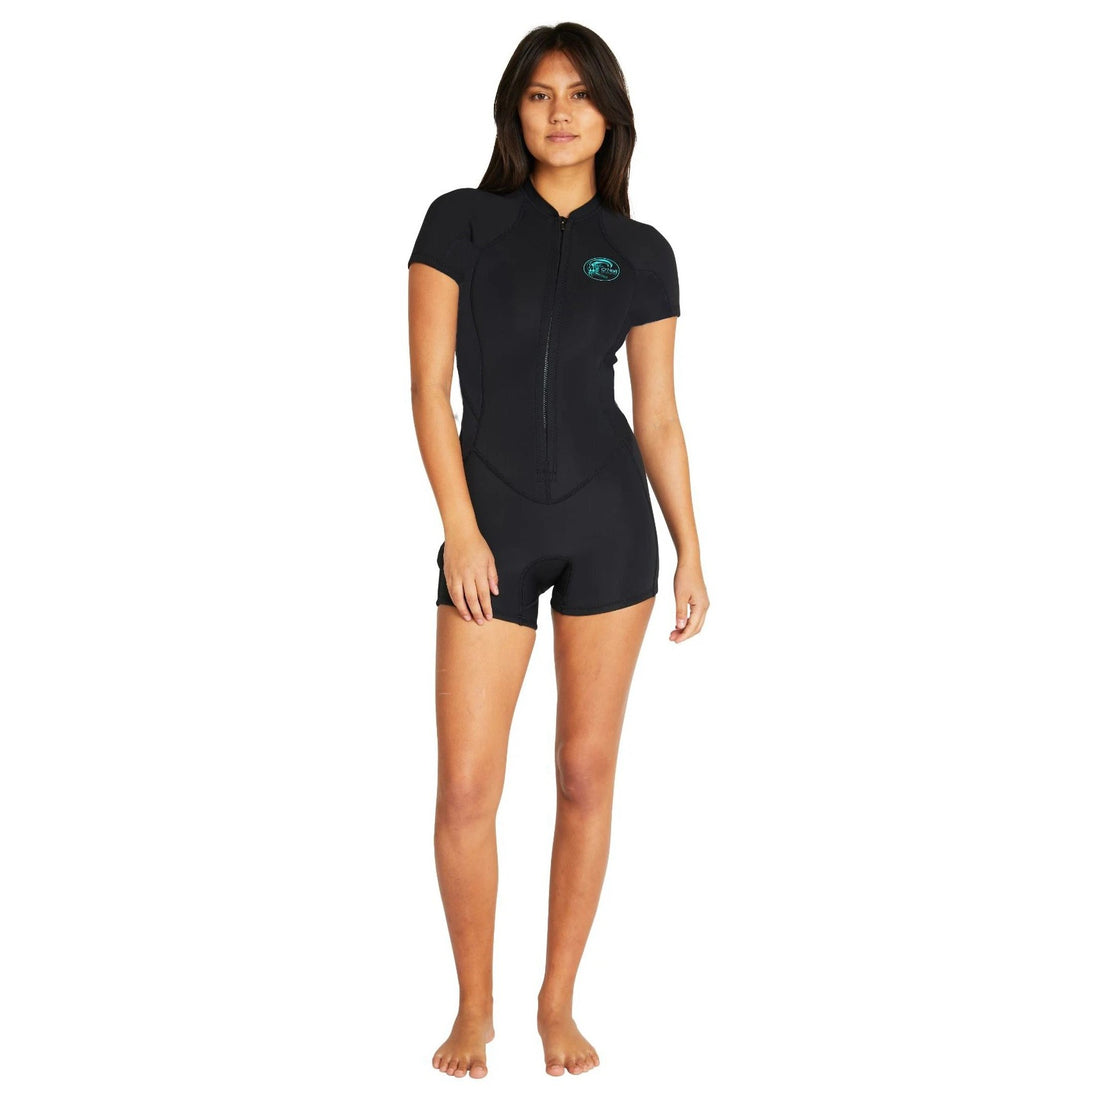 O'NEILL BAHIA FRONT ZIP SS SPRING SUIT 2MM BLACK